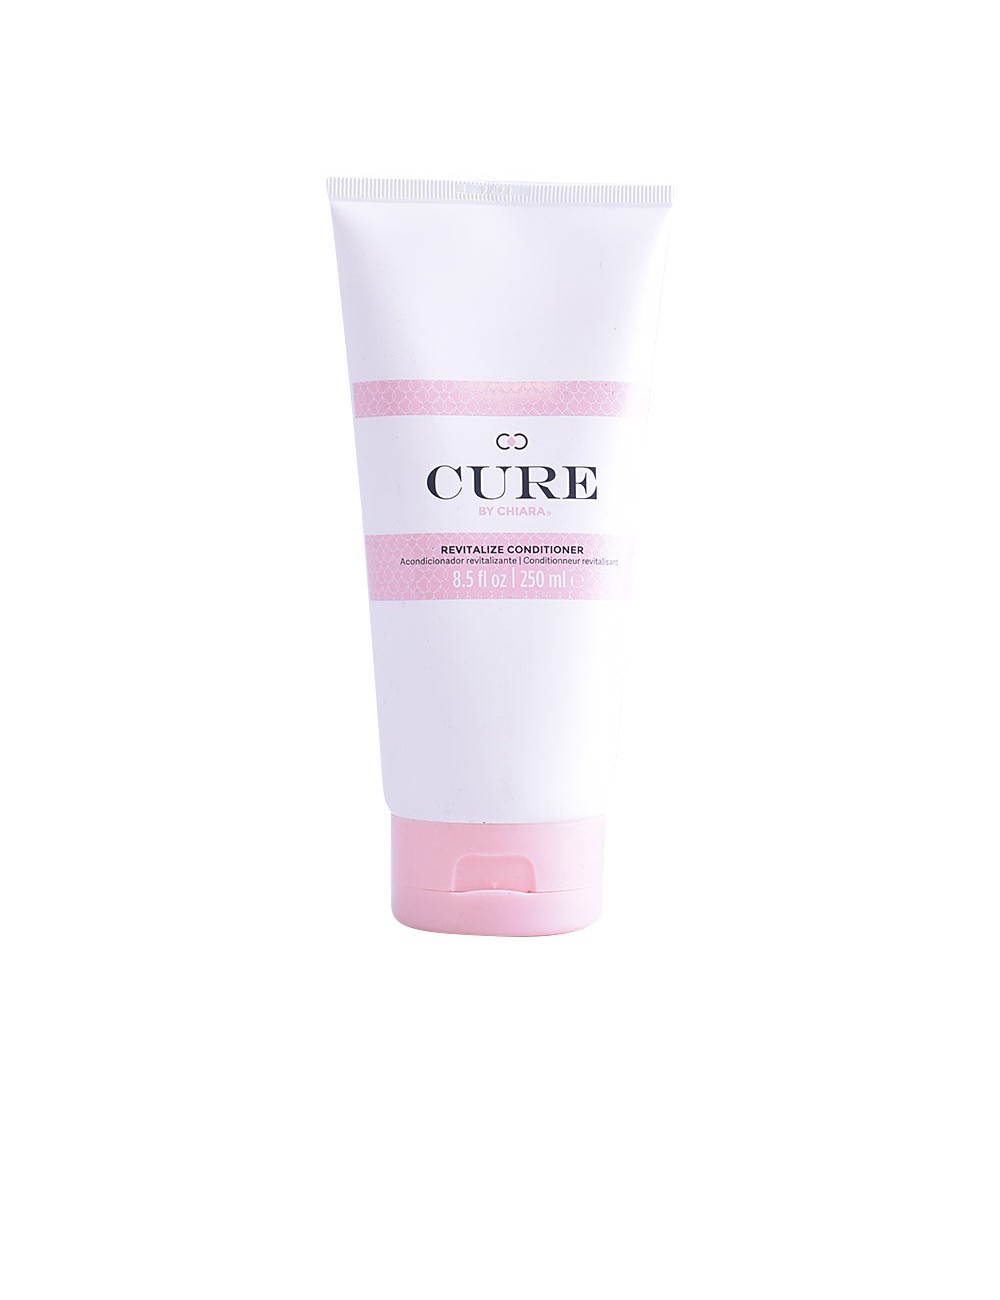 CURE BY CHIARA conditioner